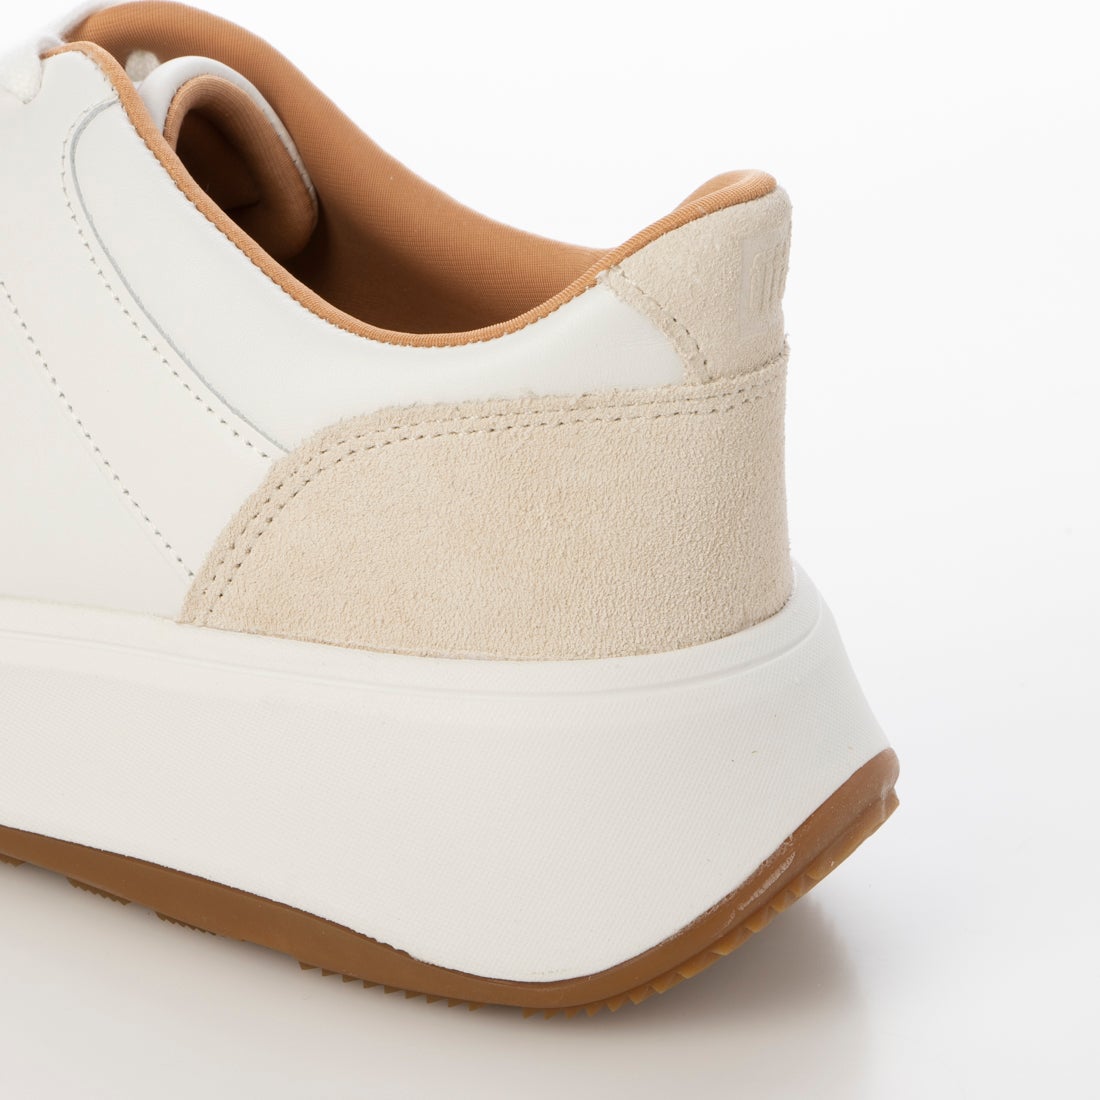 Women F-Mode Leather/Suede Flatform Sneakers, White, 59% OFF